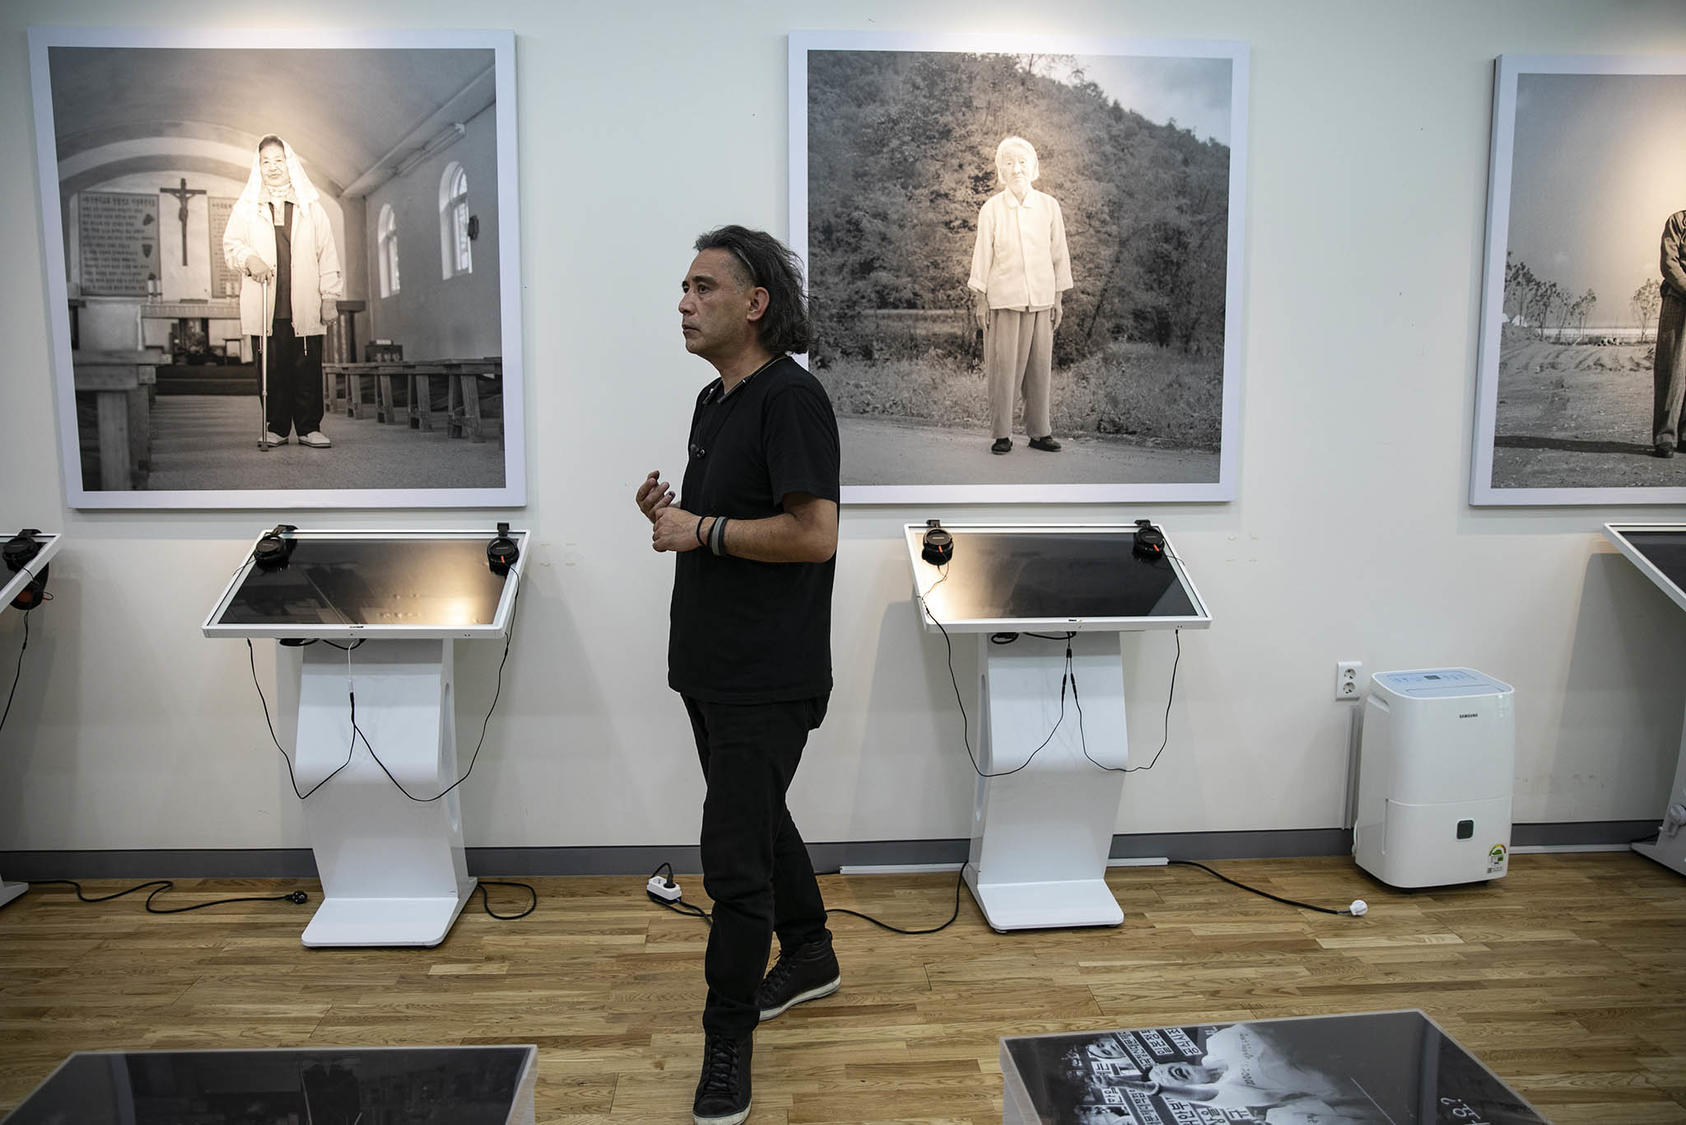 The Japanese photographer Tsukasa Yajima with portraits he took of former Korean “comfort women” at the history museum of the House of Sharing shelter, in Gwangju, South Korea. July 3, 2022. (Woohae Cho/The New York Times)